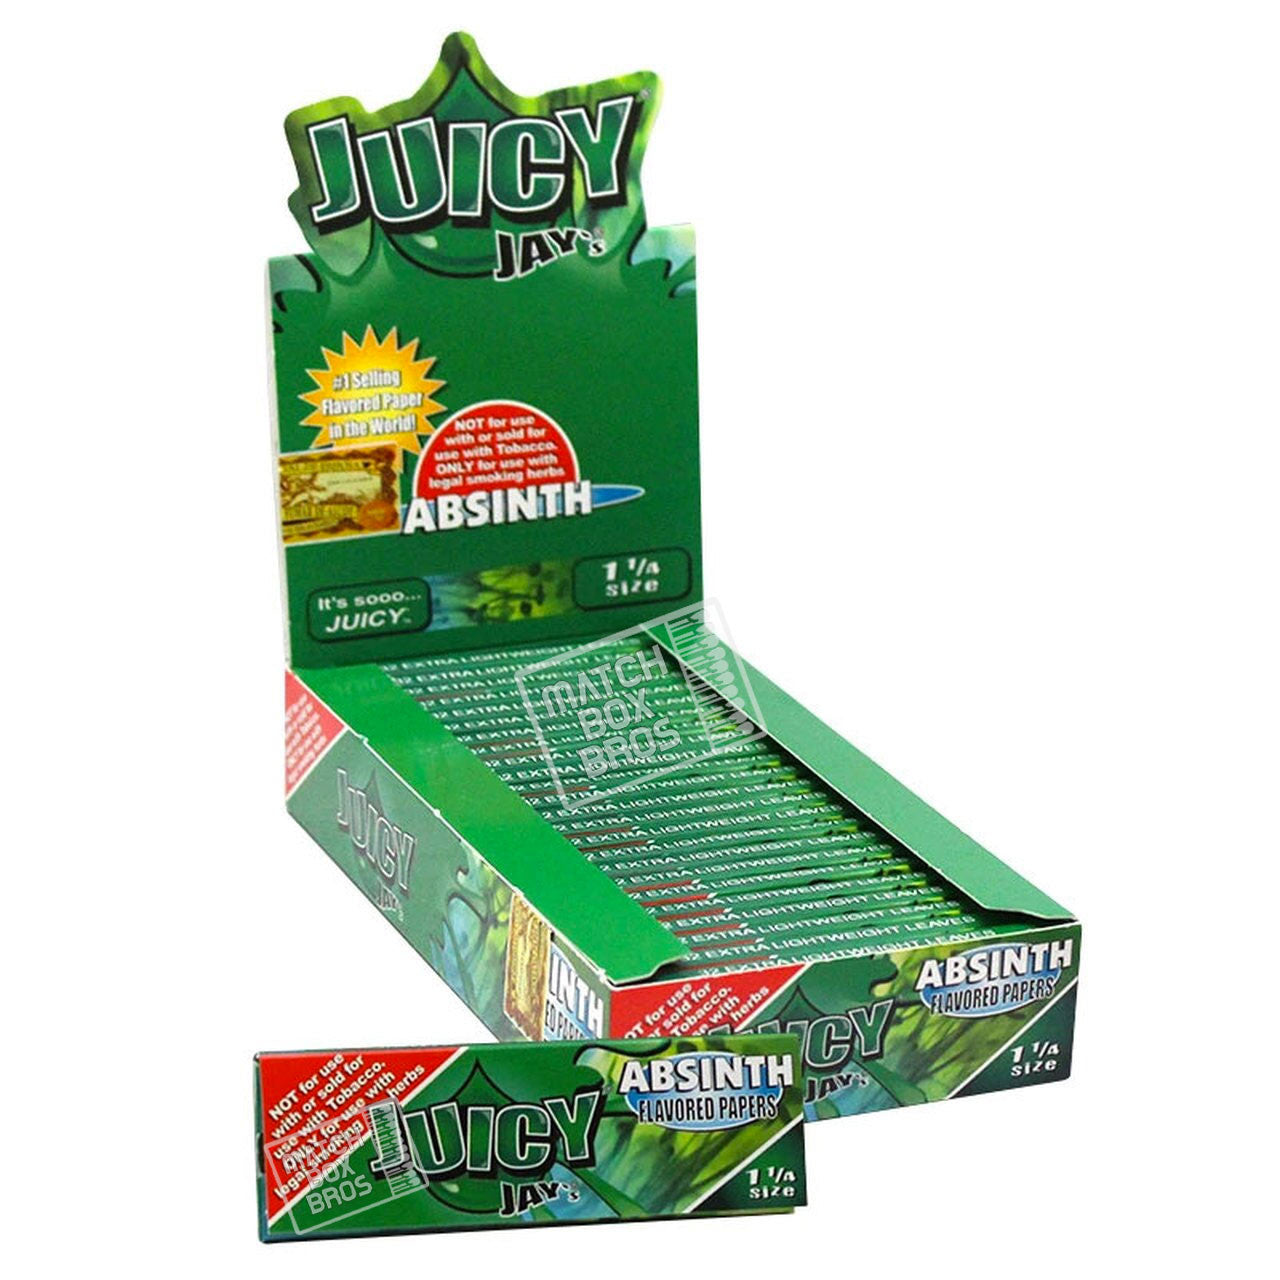 Juicy Jay's 1¼ Absinth Flavoured Paper Full Box